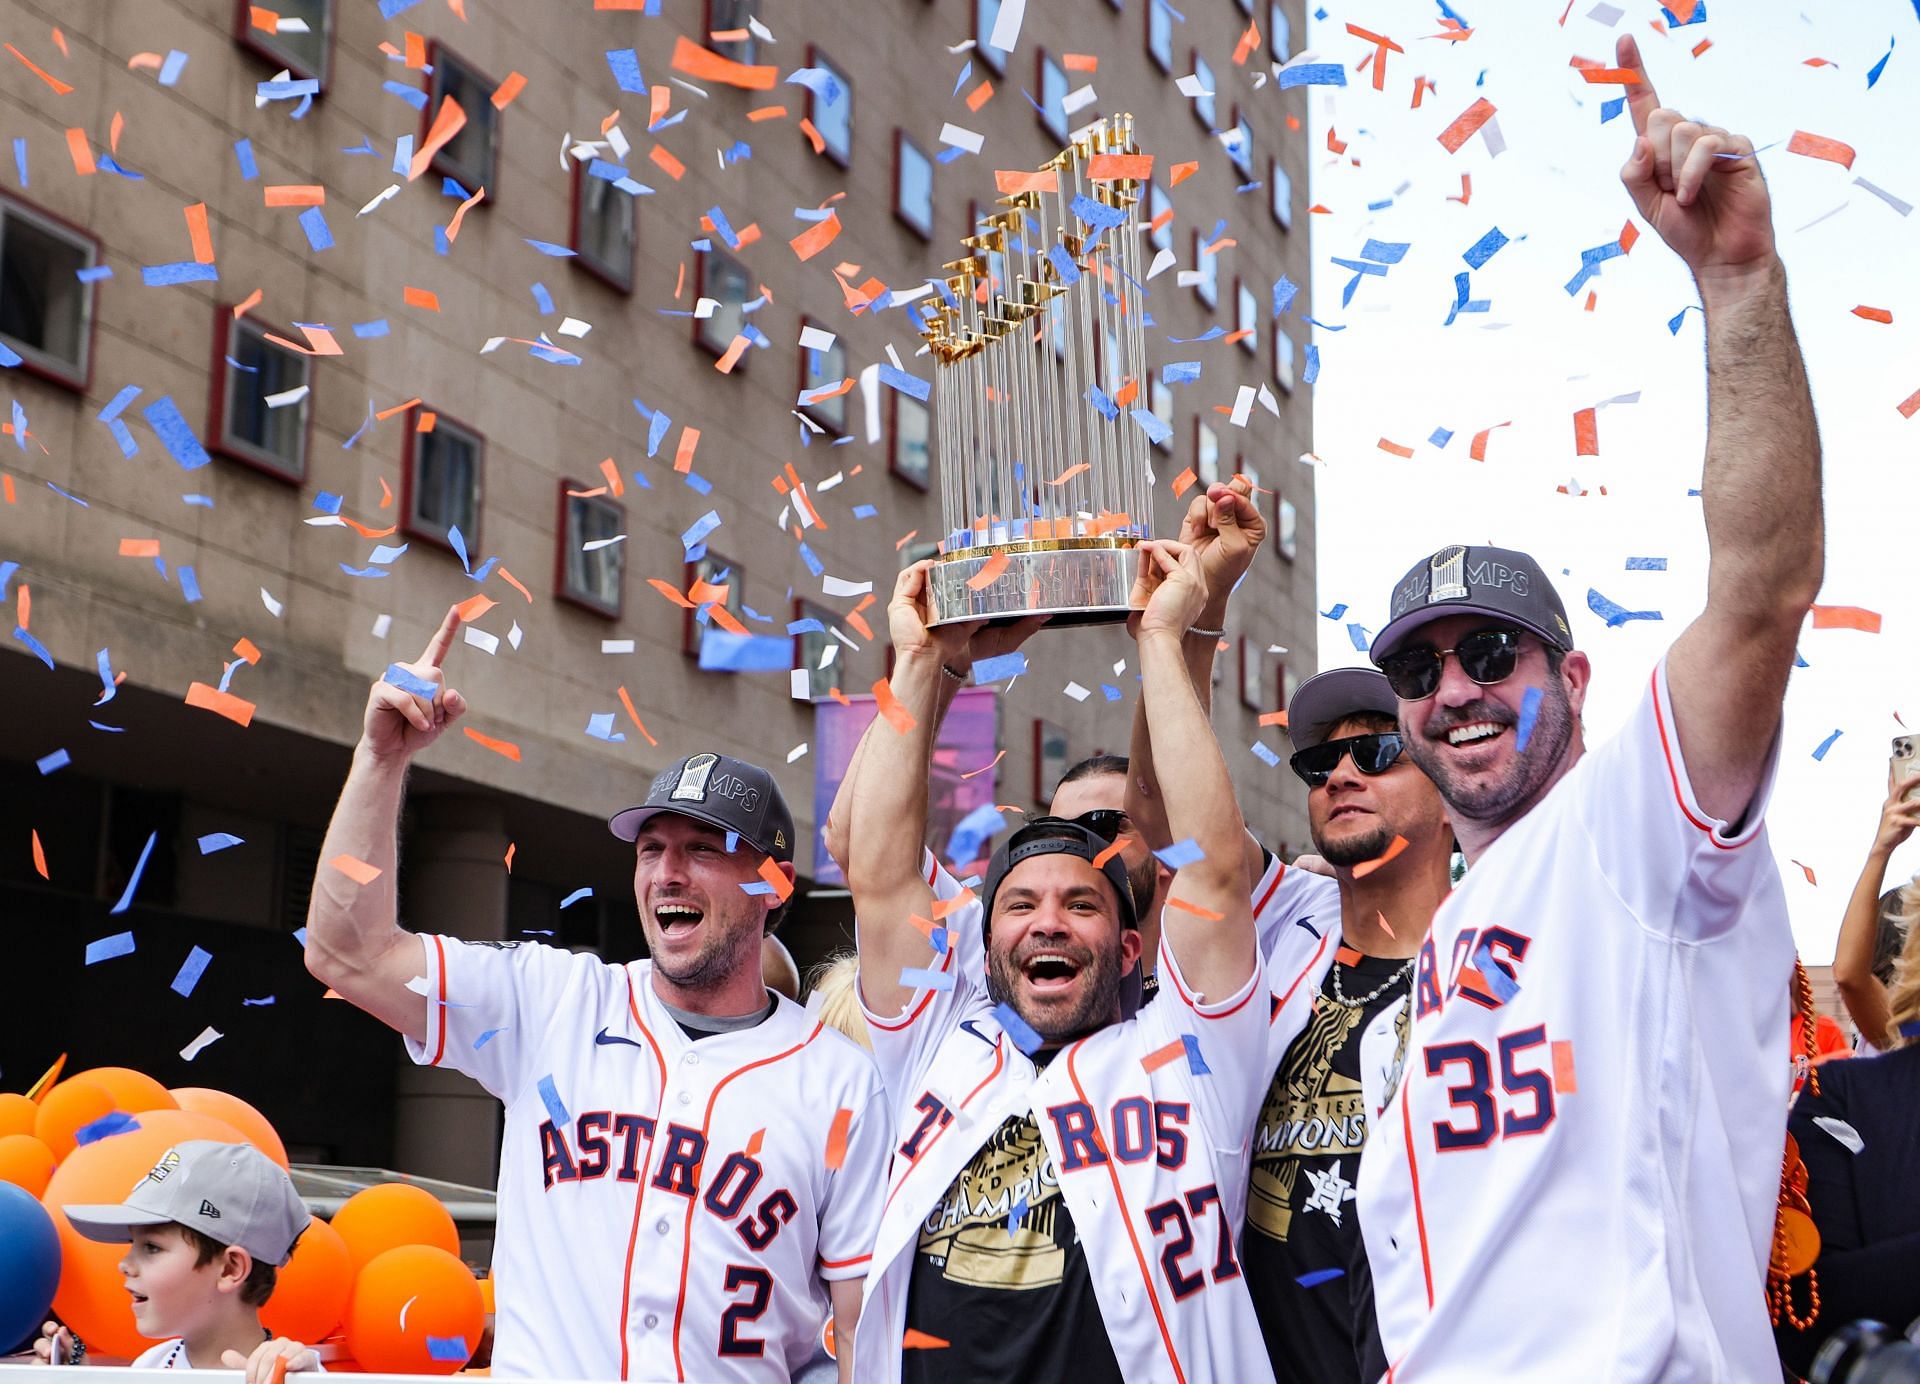 Jose Altuve #27, Alex Bregman #2, Justin Verlander #35, Yuli Gurriel #10 and Lance McCullers Jr. #43 of the Houston Astros participate in the World Series Parade. (Photo by Carmen Mandato/Getty Images)